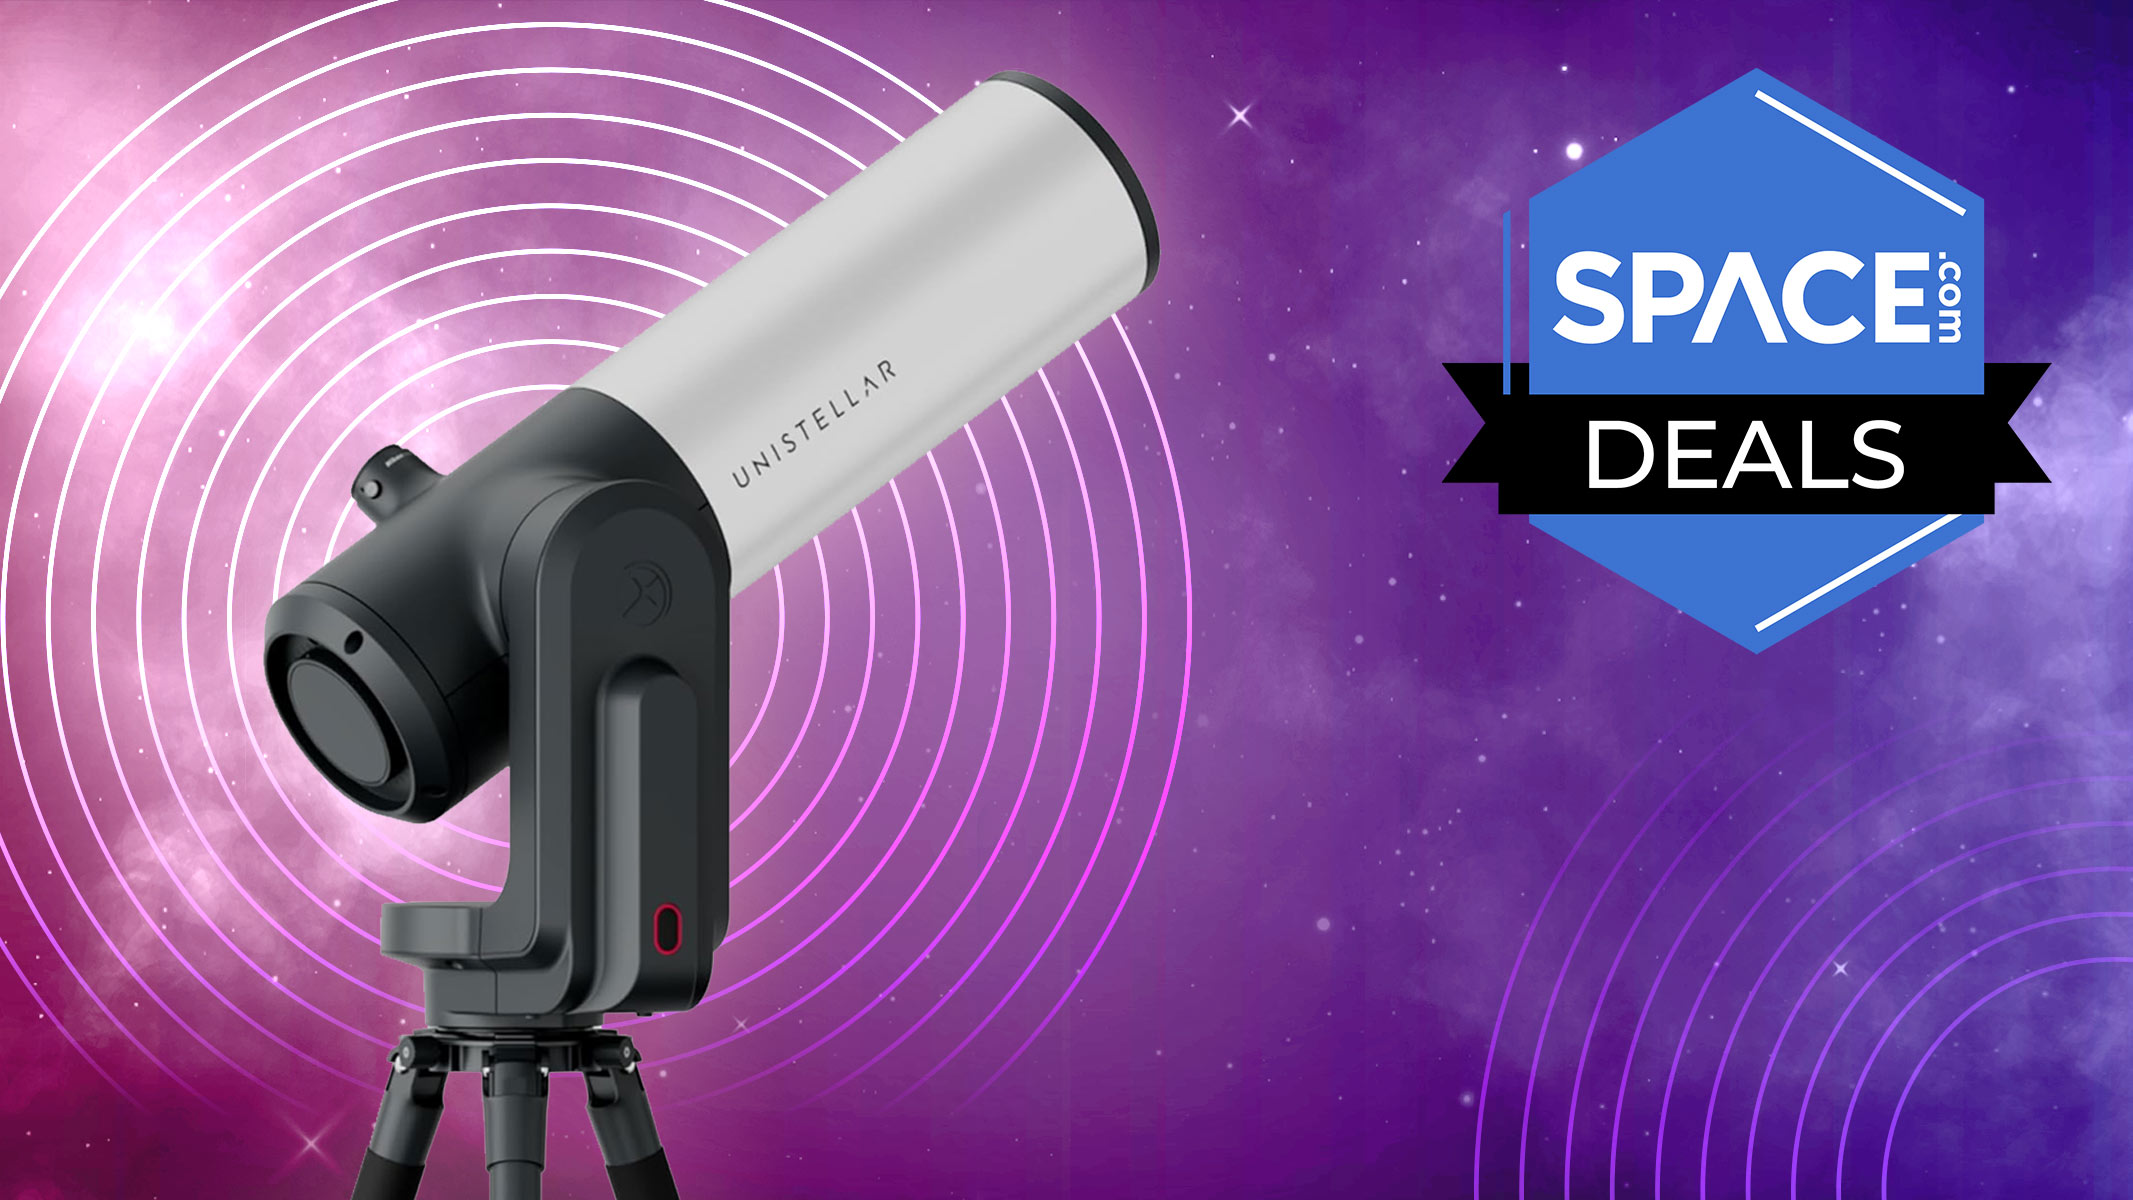 The Unistellar eVscope 2 is $1160 off ahead of Prime Day Space